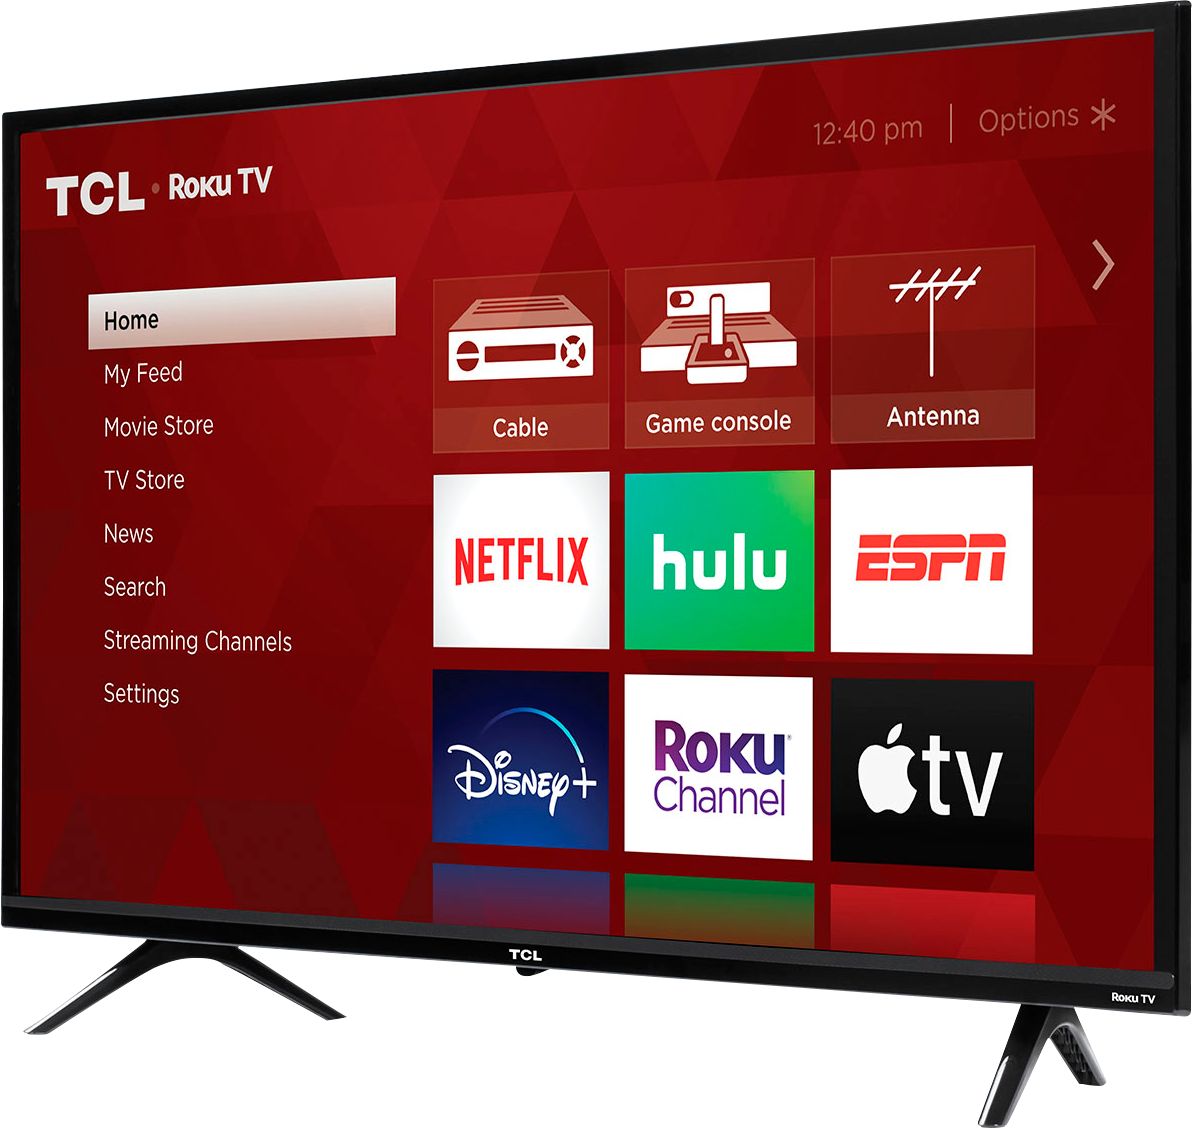 Questions And Answers Tcl 32 Class 3 Series 720p Hd Led Roku Smart Tv 32s335 32s335 Best Buy